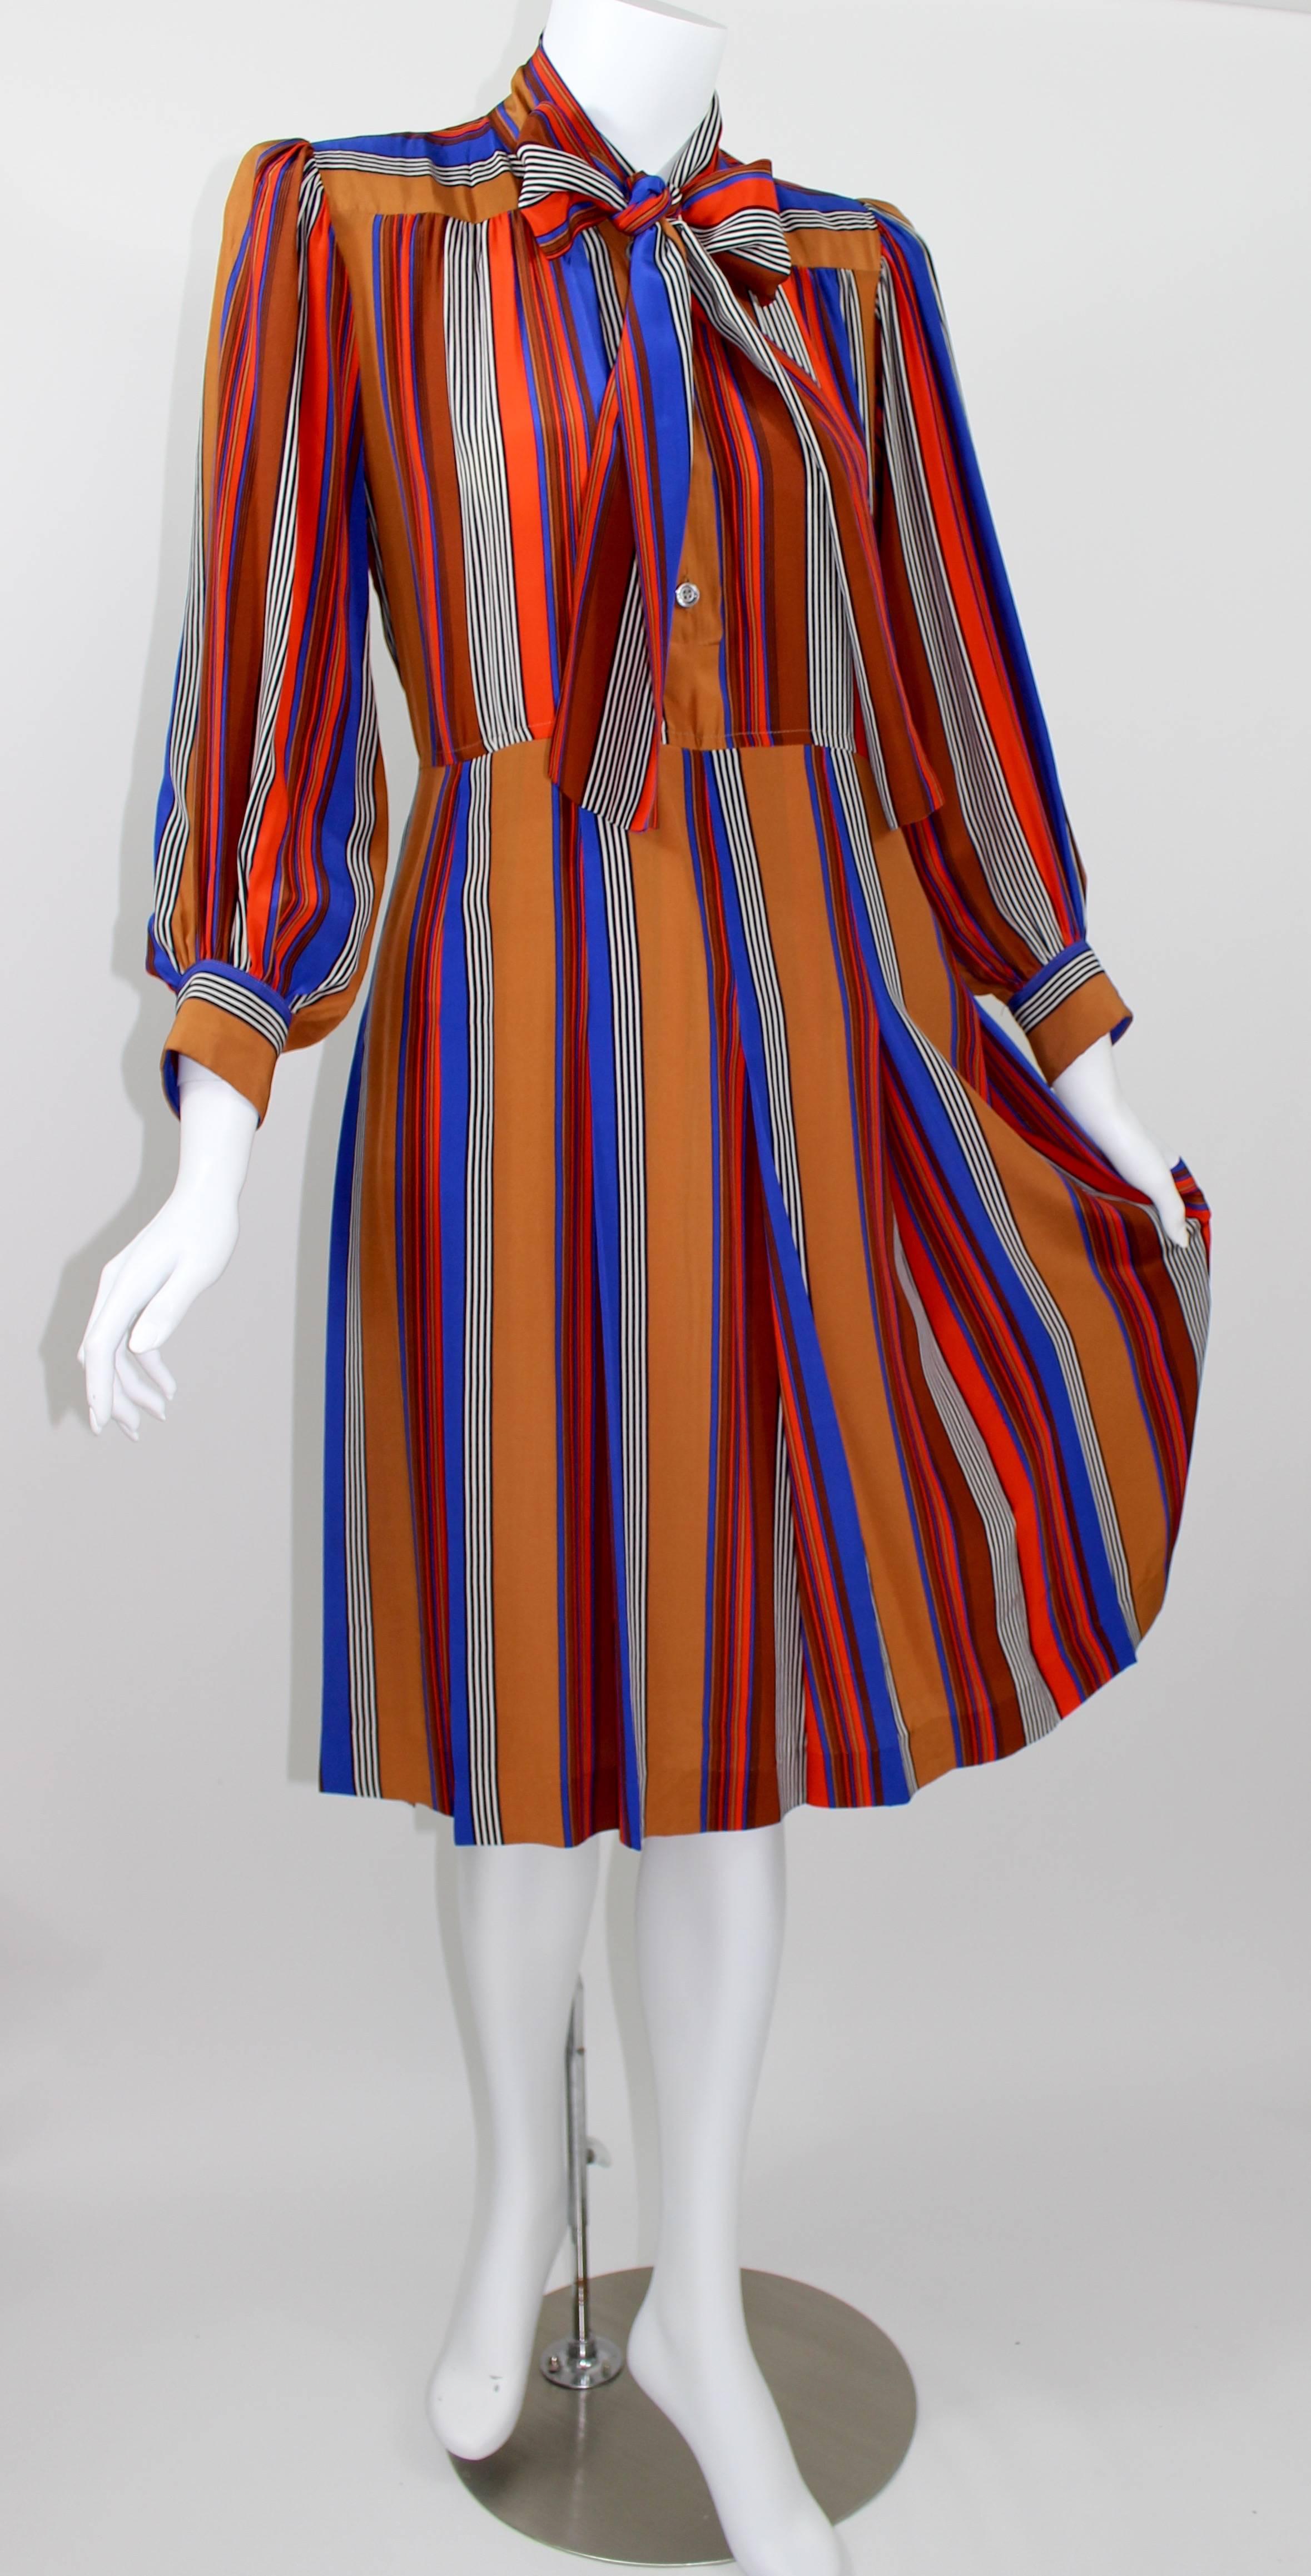 Yves Saint Laurent Striped silk dress with an attached silk sash bow.

Size estimate: XS/S
